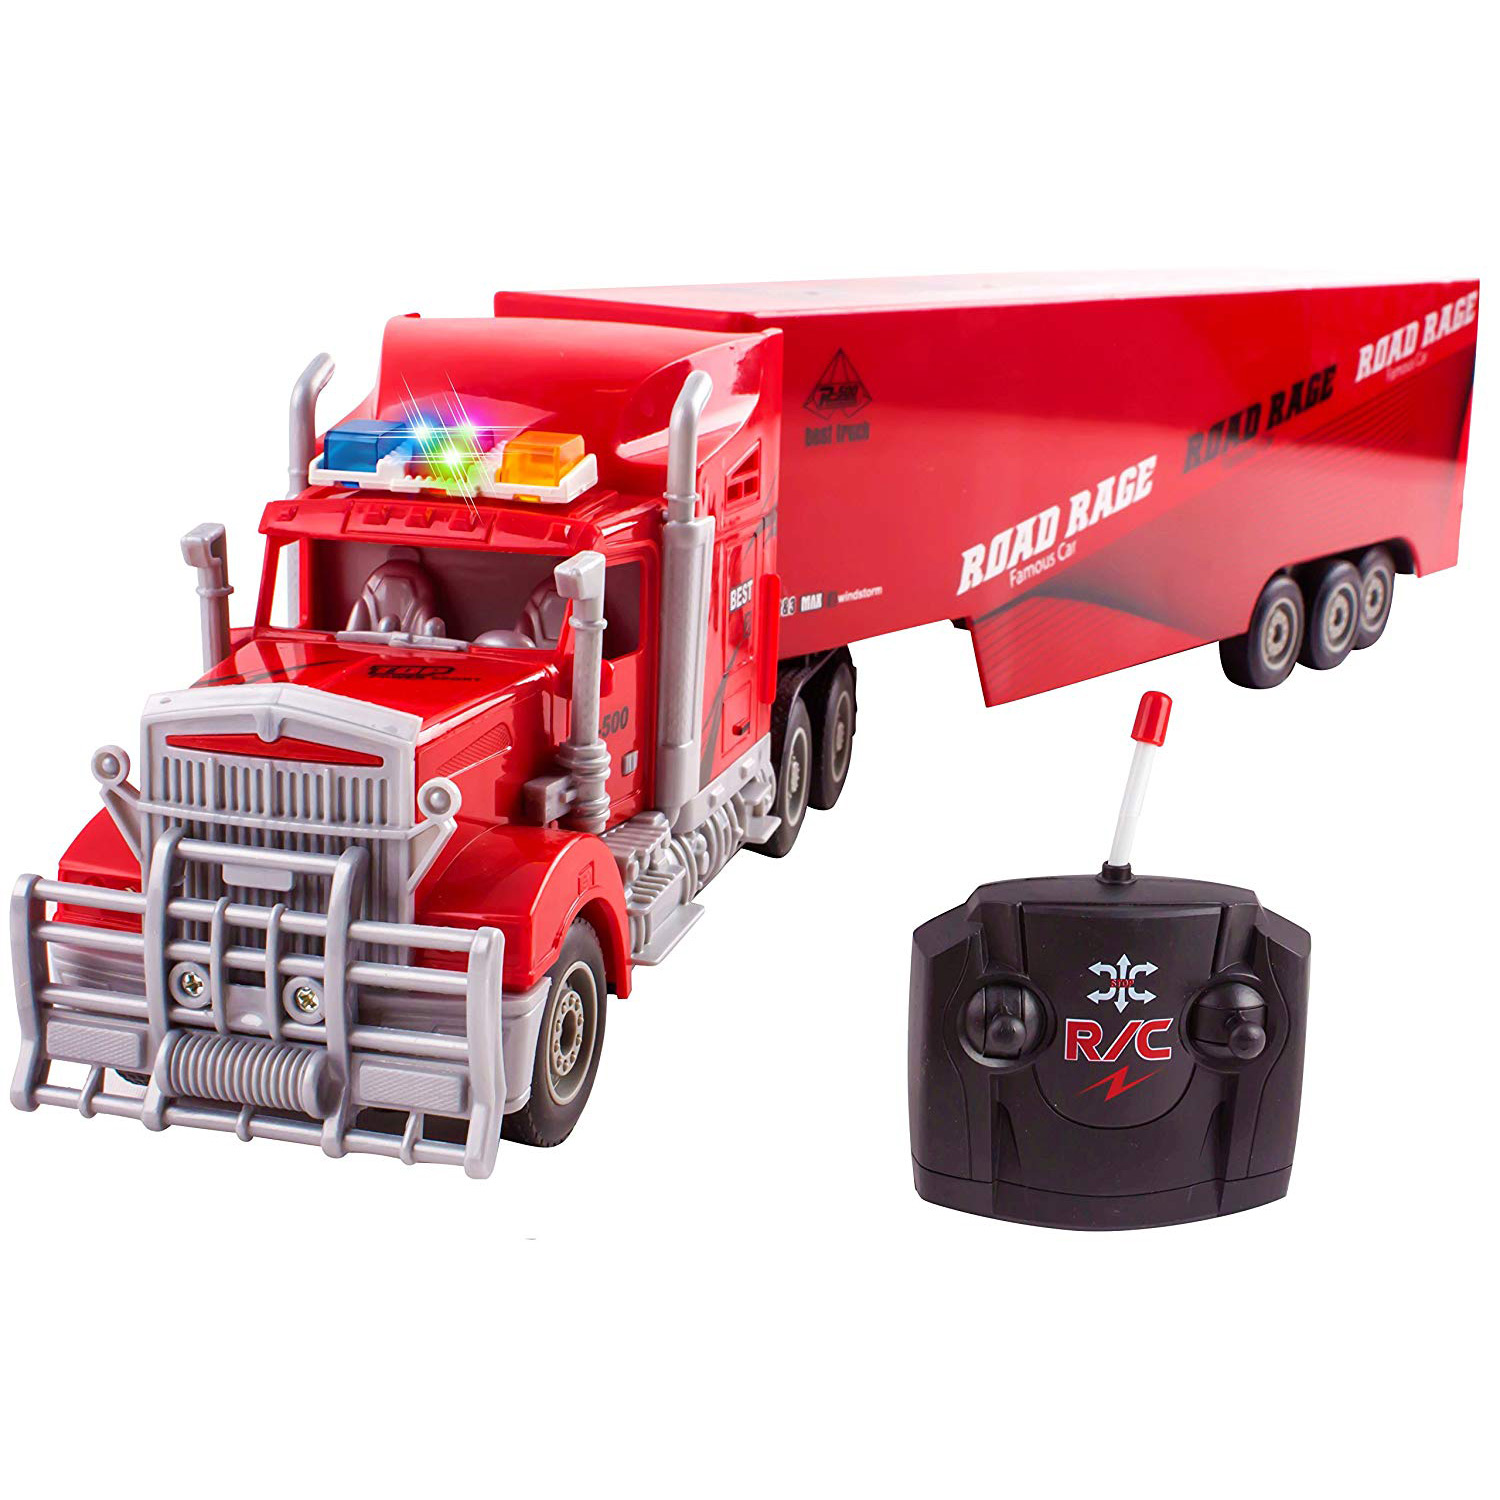 Toy Semi Truck Trailer 23\" Electric Hauler Remote Control RC Children’s Transporter Ready To Run Full Cargo Perfect Big Rig For Kids Toys (Red)